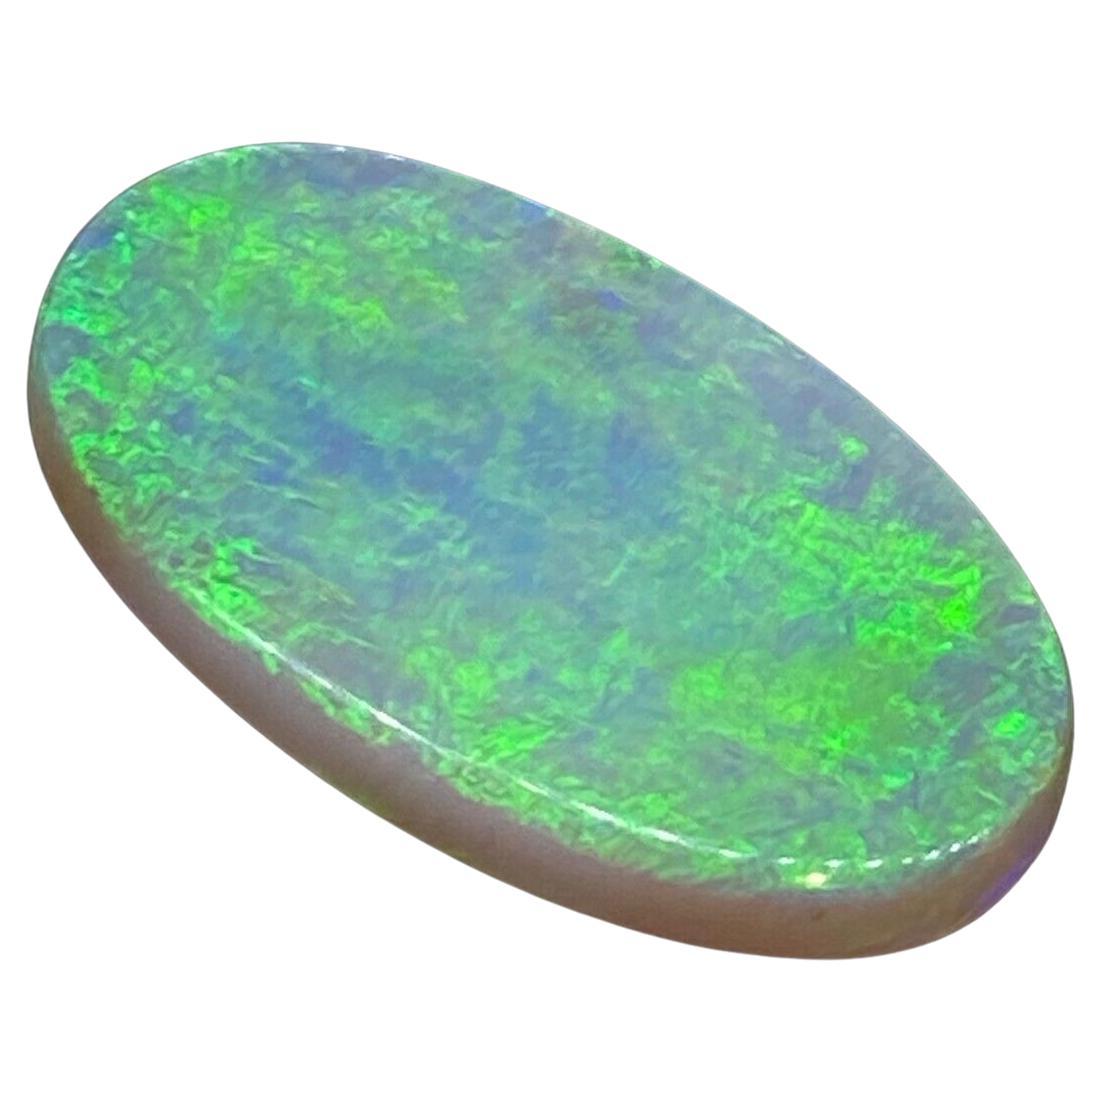 10.32ct Oval Cabochon Cut Loose Australian Opal. Valued at $10000.